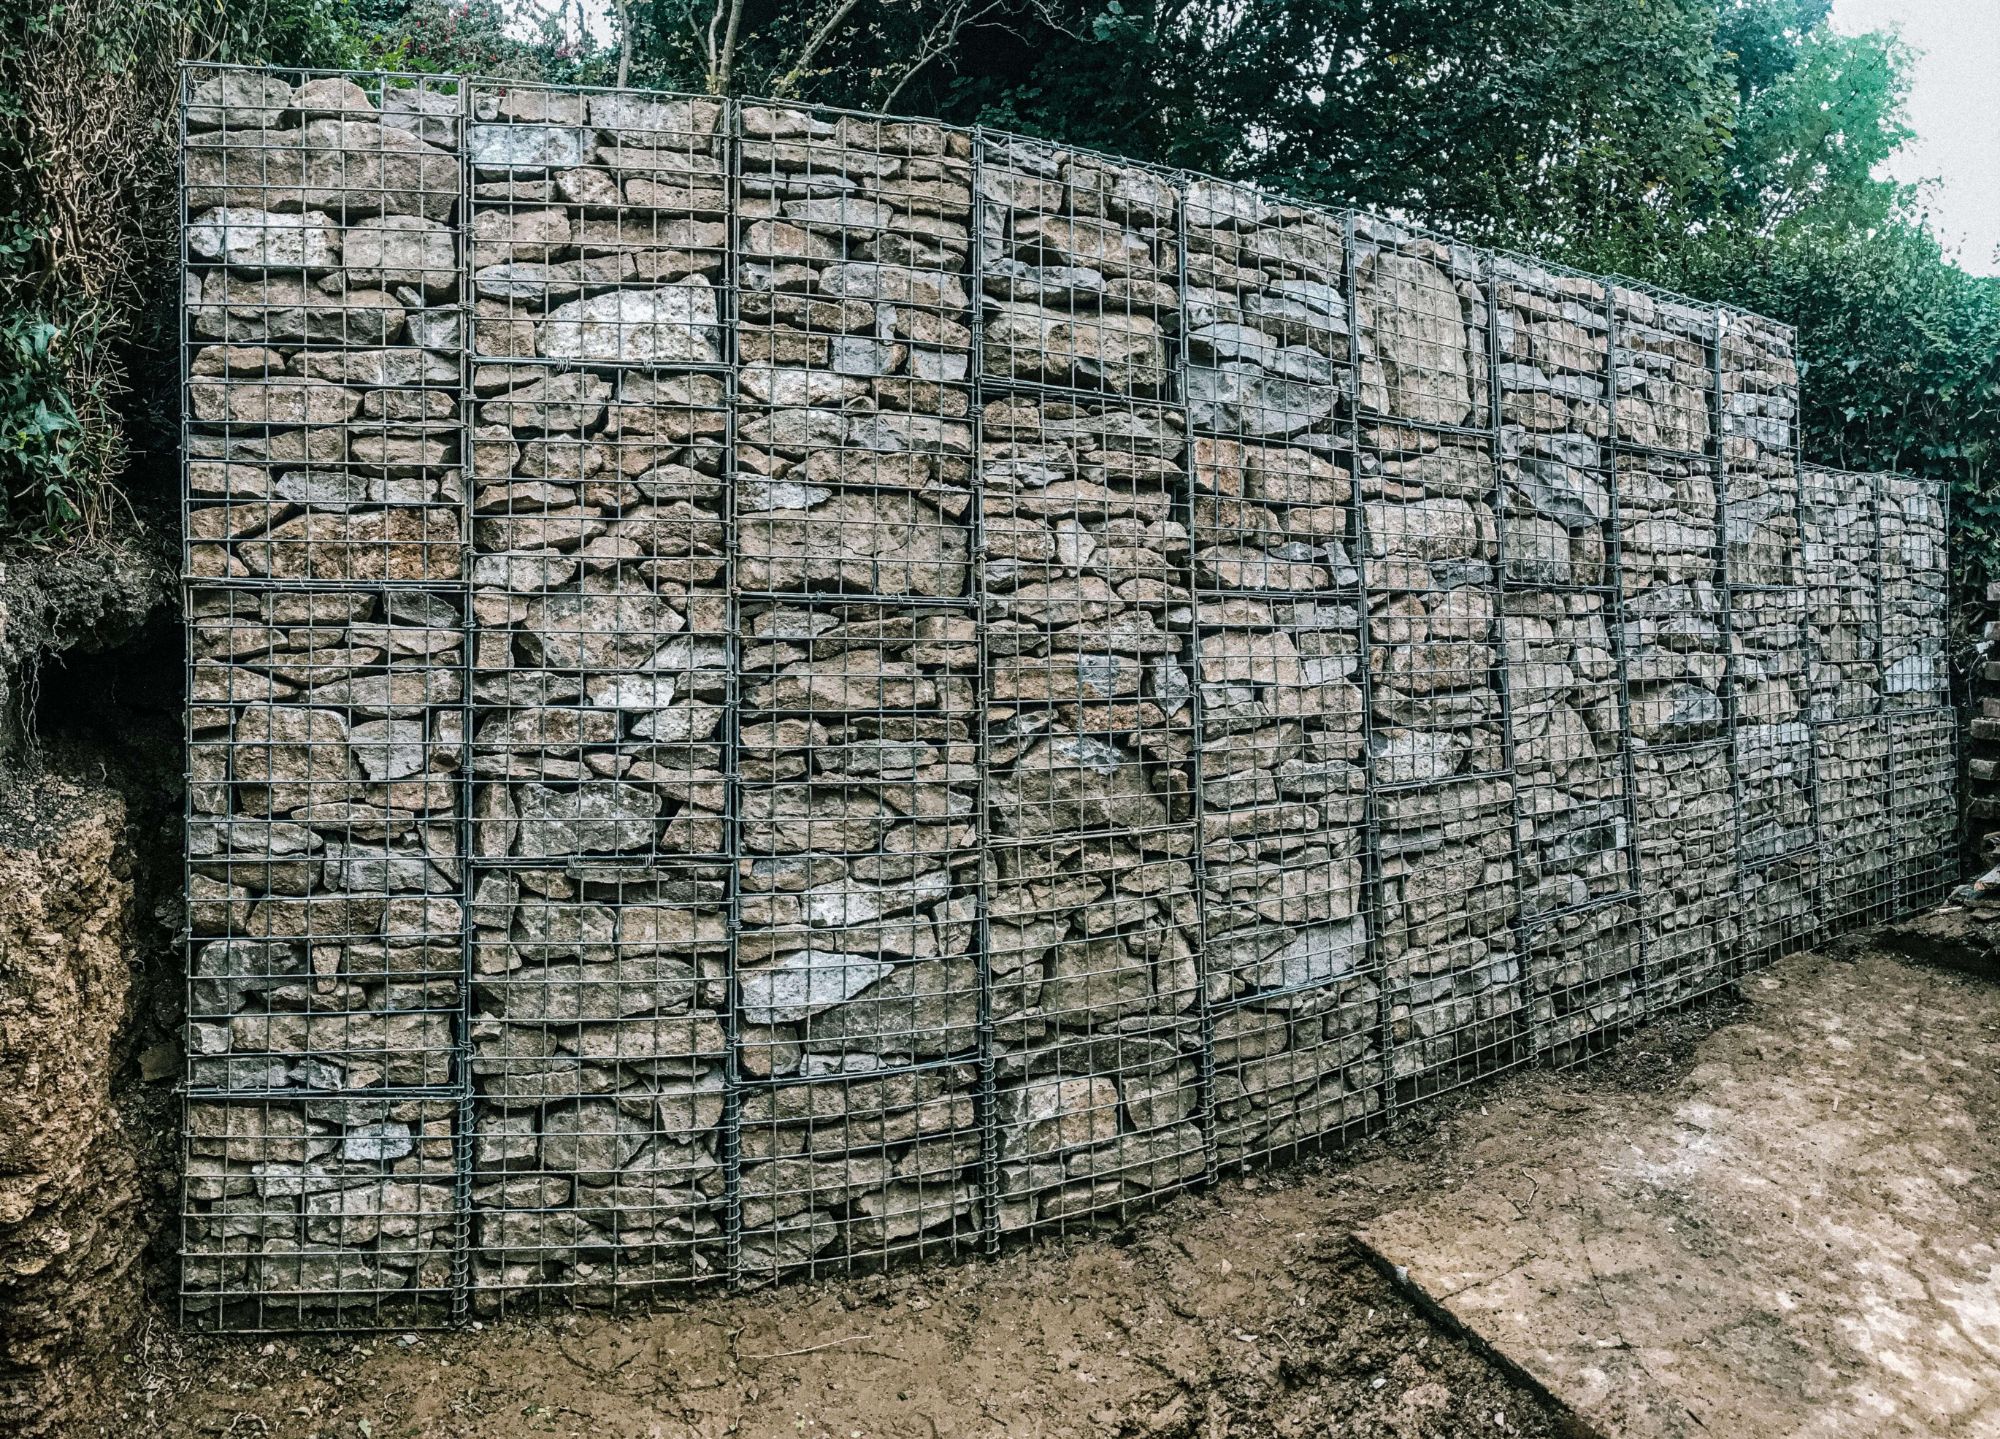 A photo of a gabion basket dry stone wall in Ecclesall in Sheffield